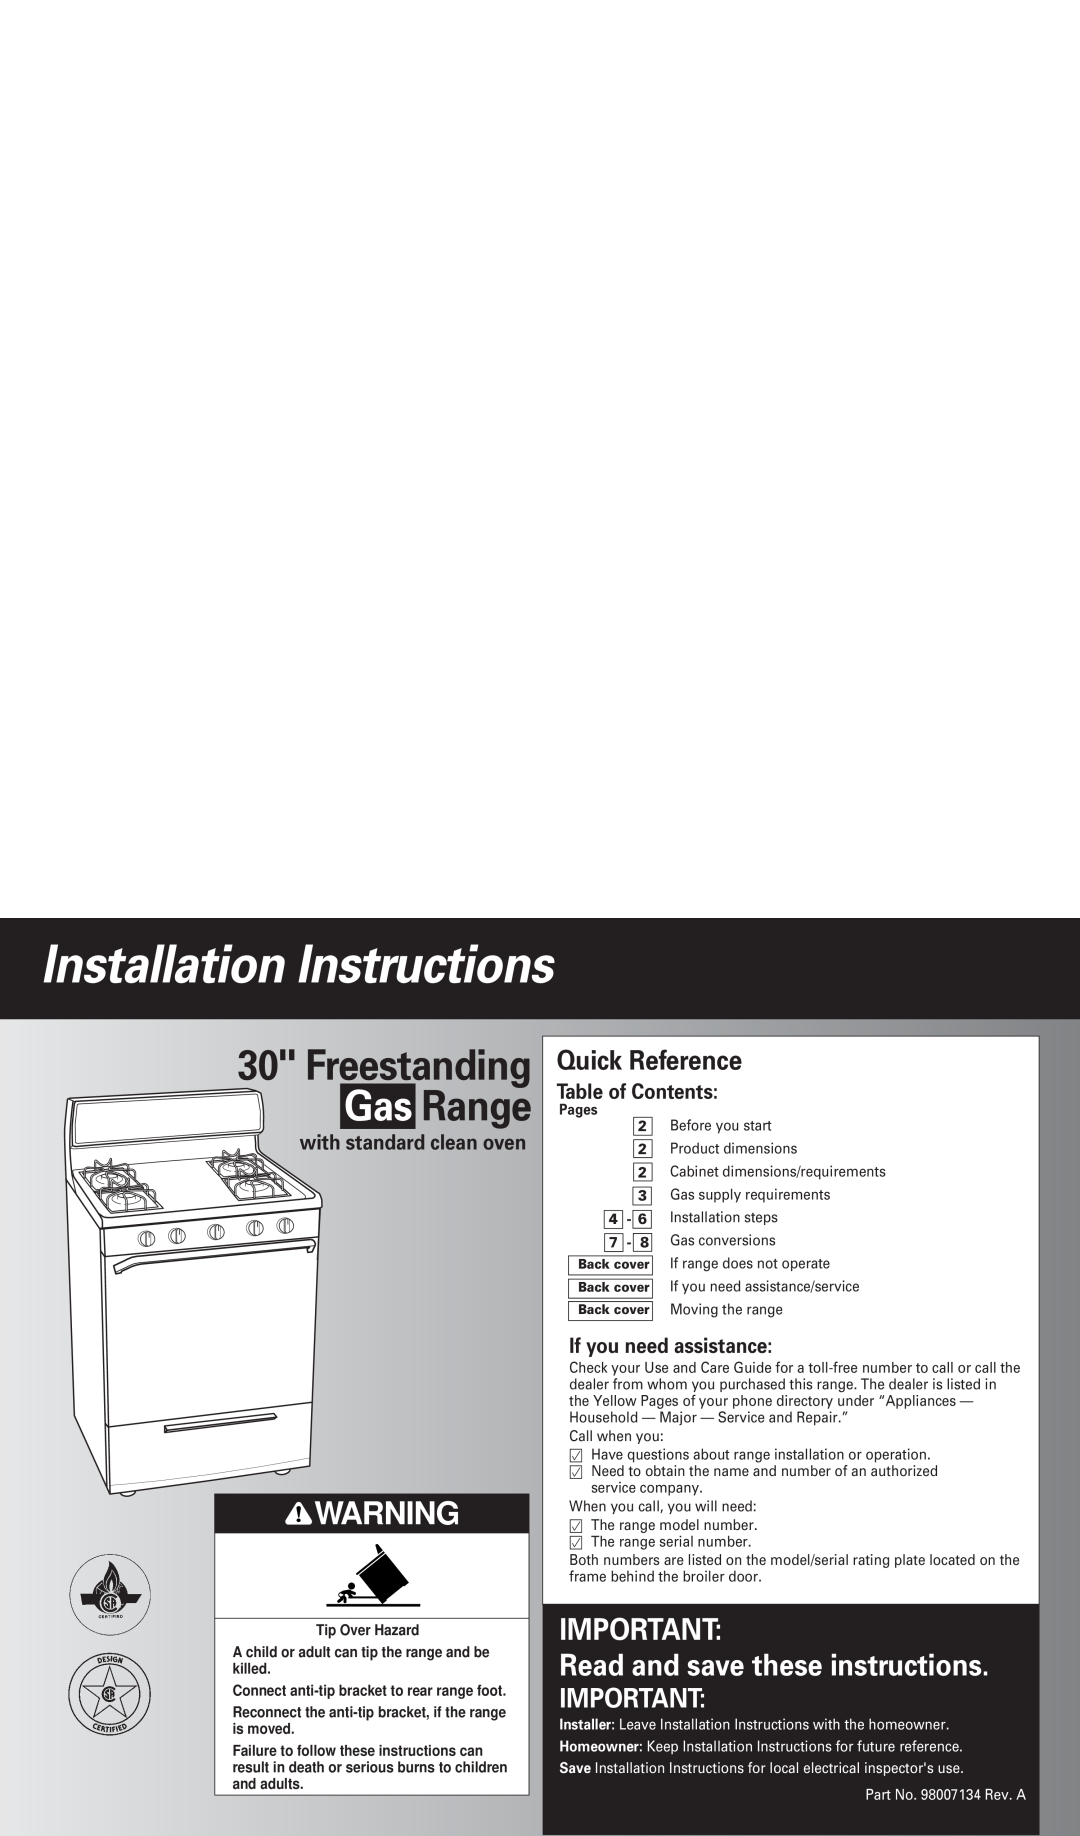 Whirlpool FGP300JN0 installation instructions Quick Reference, Table of Contents, If you need assistance, Gas Range 